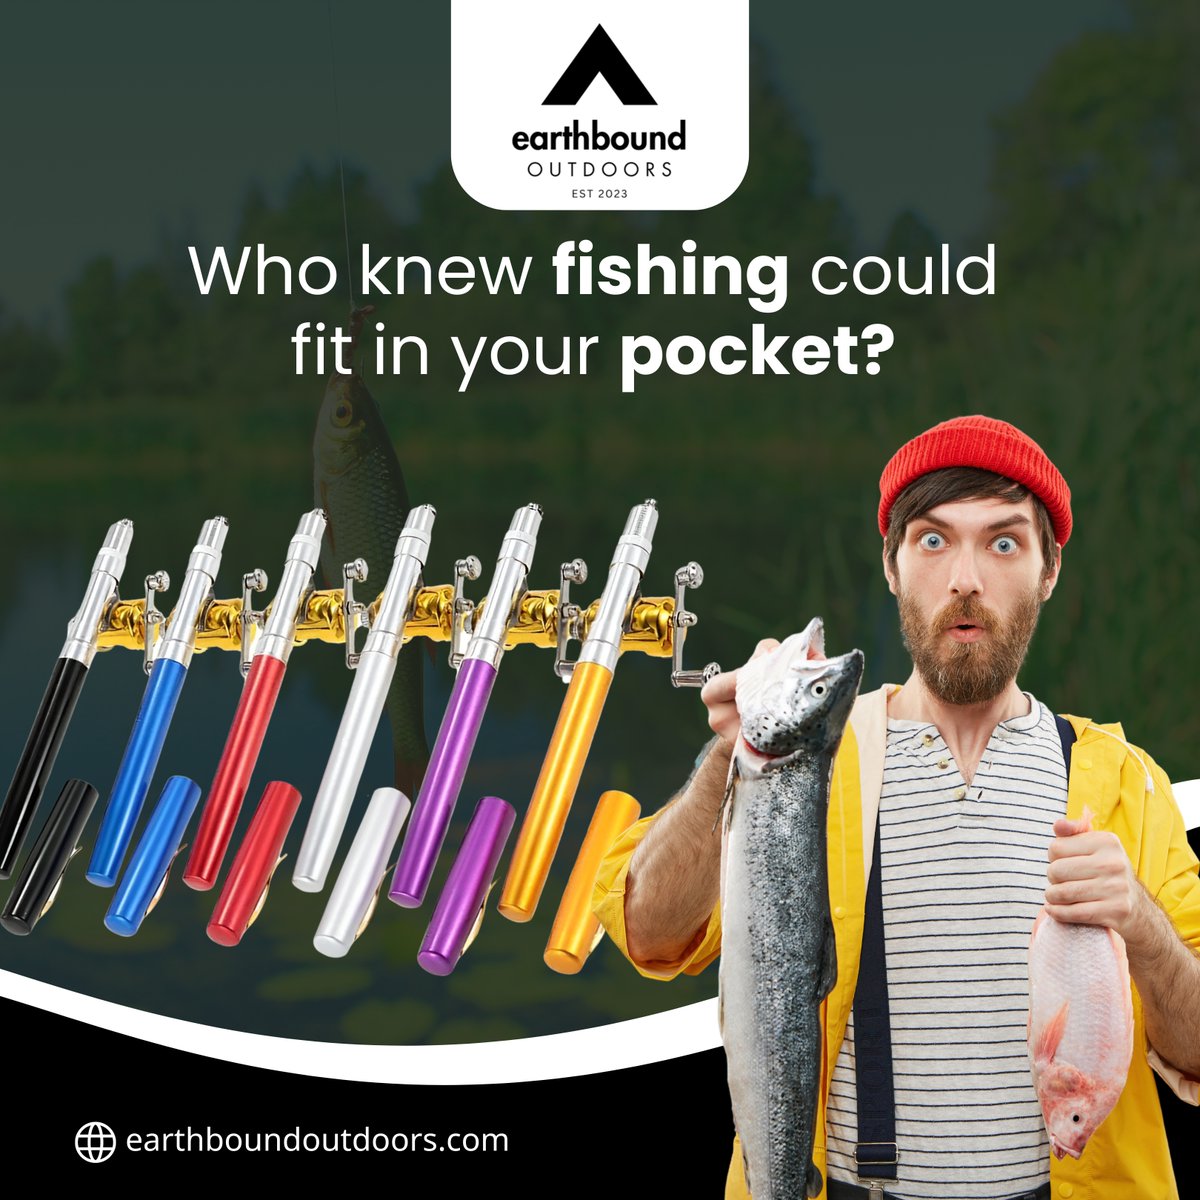 Ever wished you could fish on a whim? 🎣✨ With our Portable Mini Fishing Rod Pen, it's as easy as click, cast, and catch! Pocket-sized power for spontaneous anglers. Now you can fish whenever inspiration strikes—just don't let the boss see! 🐟💼 #PocketFishing #ReadyToCatch